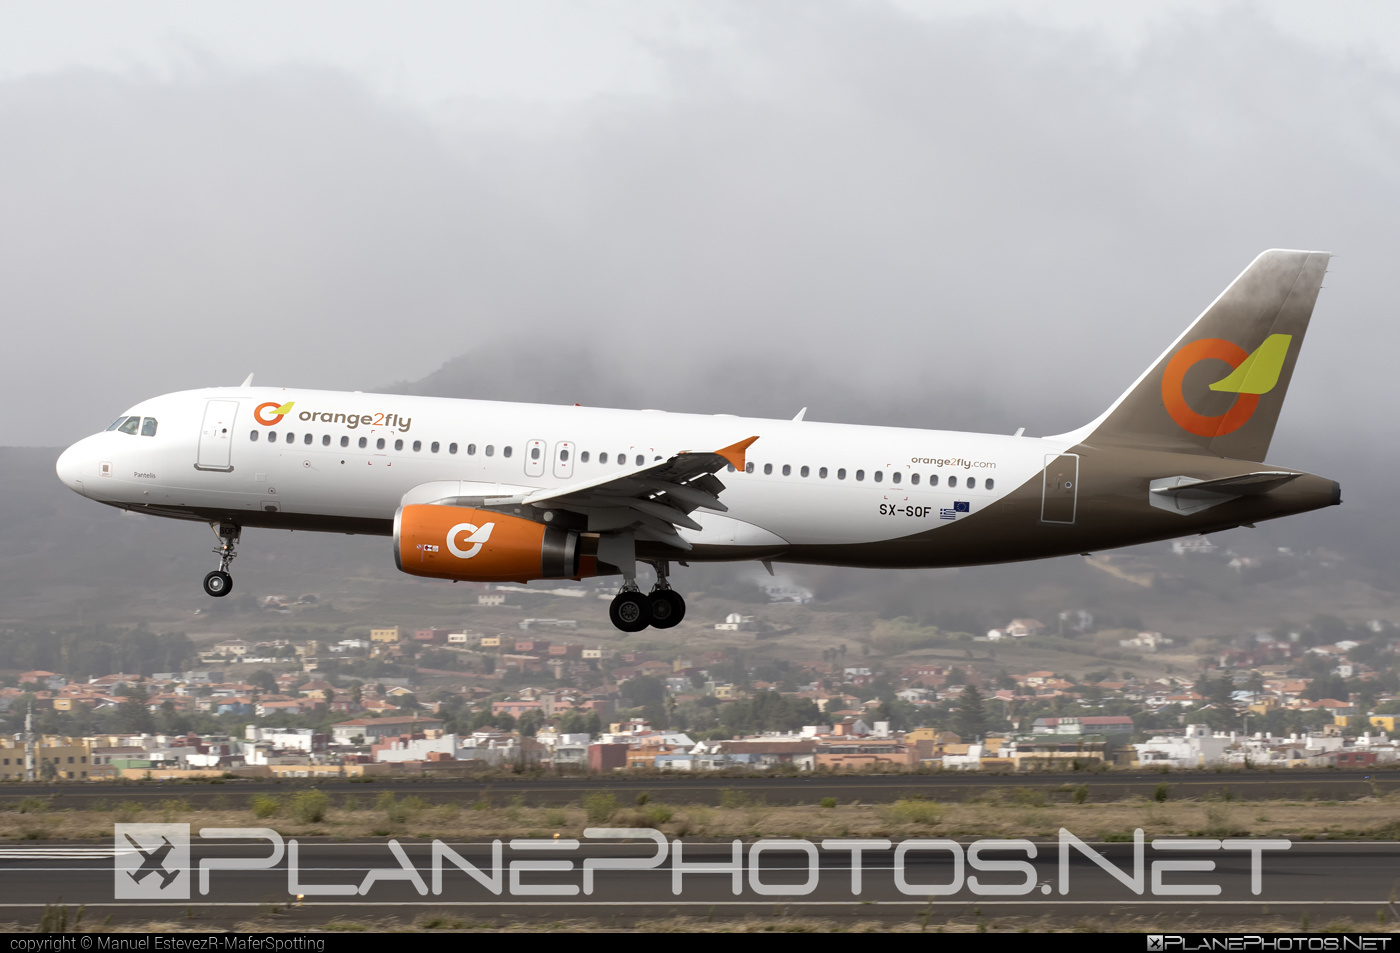 Airbus A320-232 - SX-SOF operated by orange2fly #a320 #a320family #airbus #airbus320